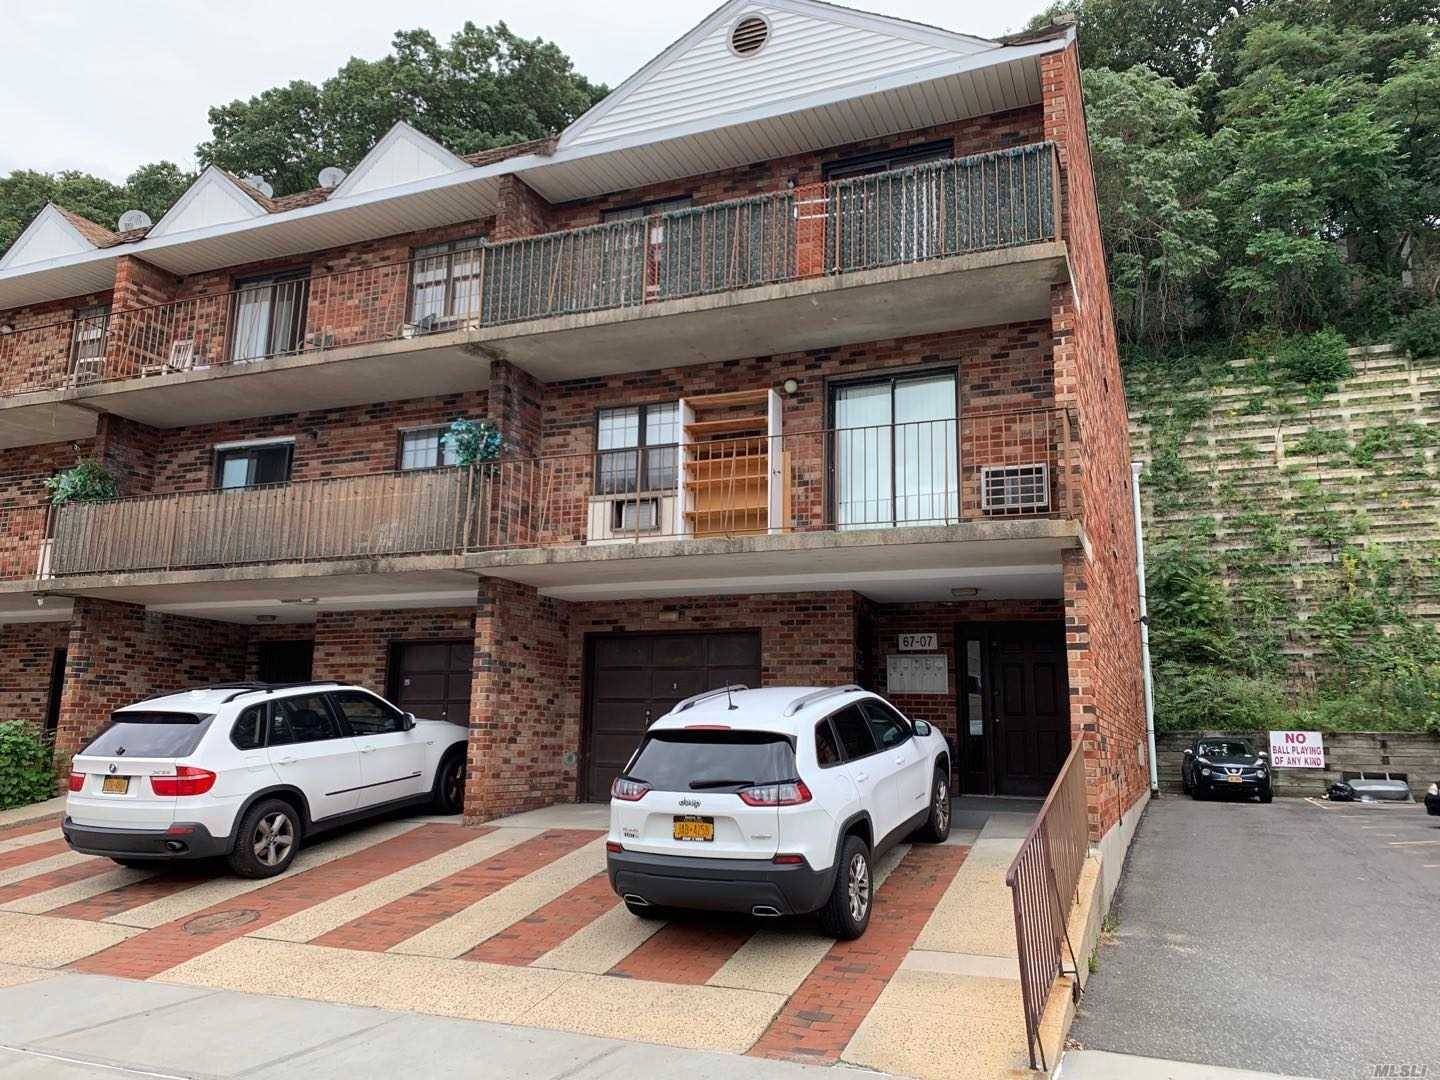 Two Bedroom Duplex Condominium In The Heart Of Douglaston This neighborhood is within one of the best NYC school districts.